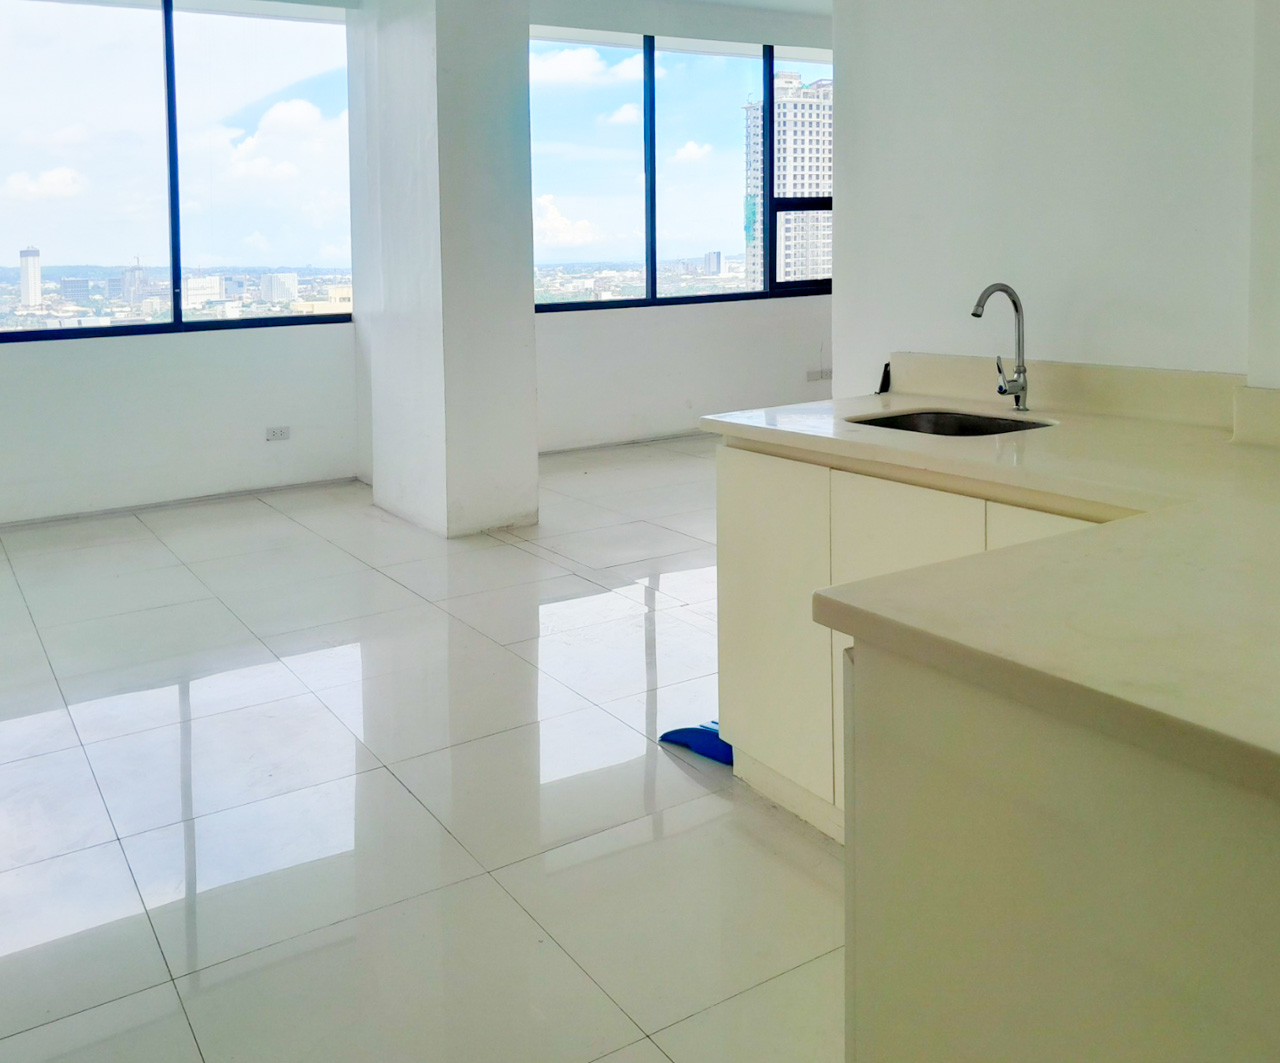 RCPAT3 100 SqM Office Space for Rent in Cebu - 2